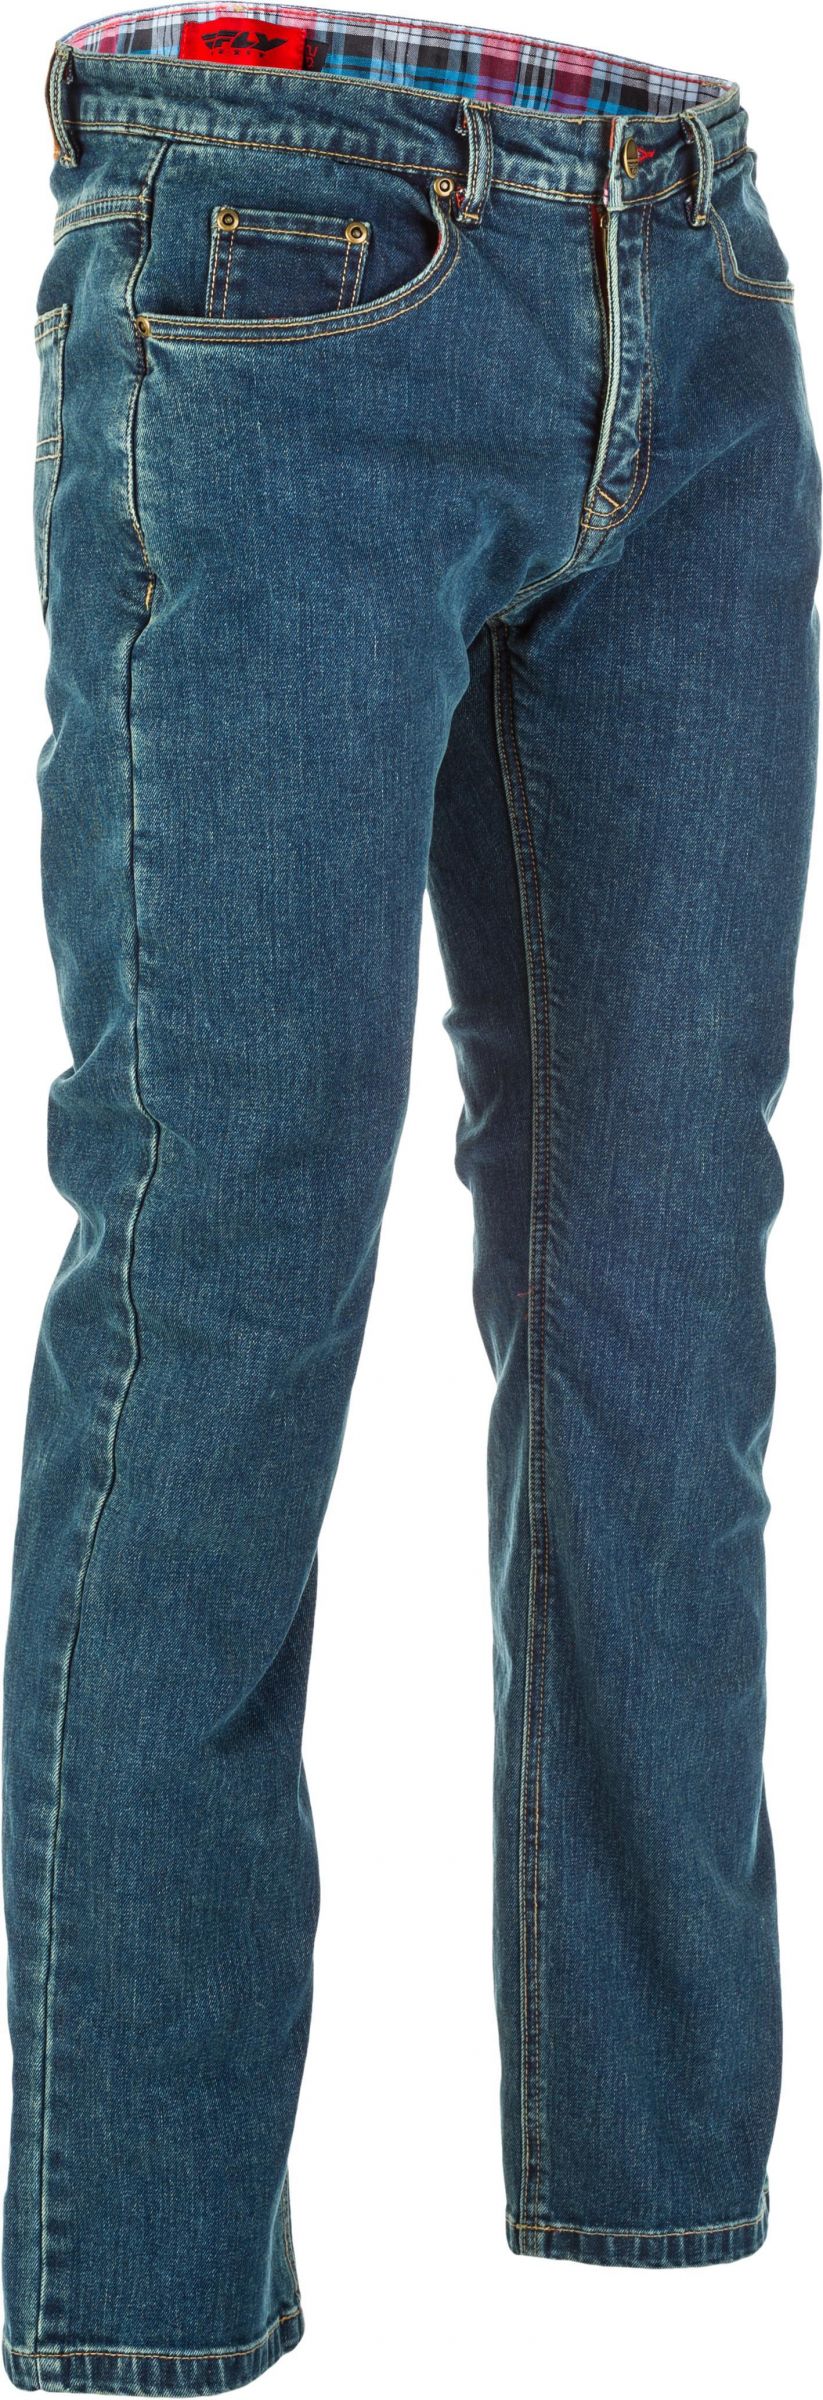 8RQS-FLY-RA-6049-478-30436 Resistance Jeans